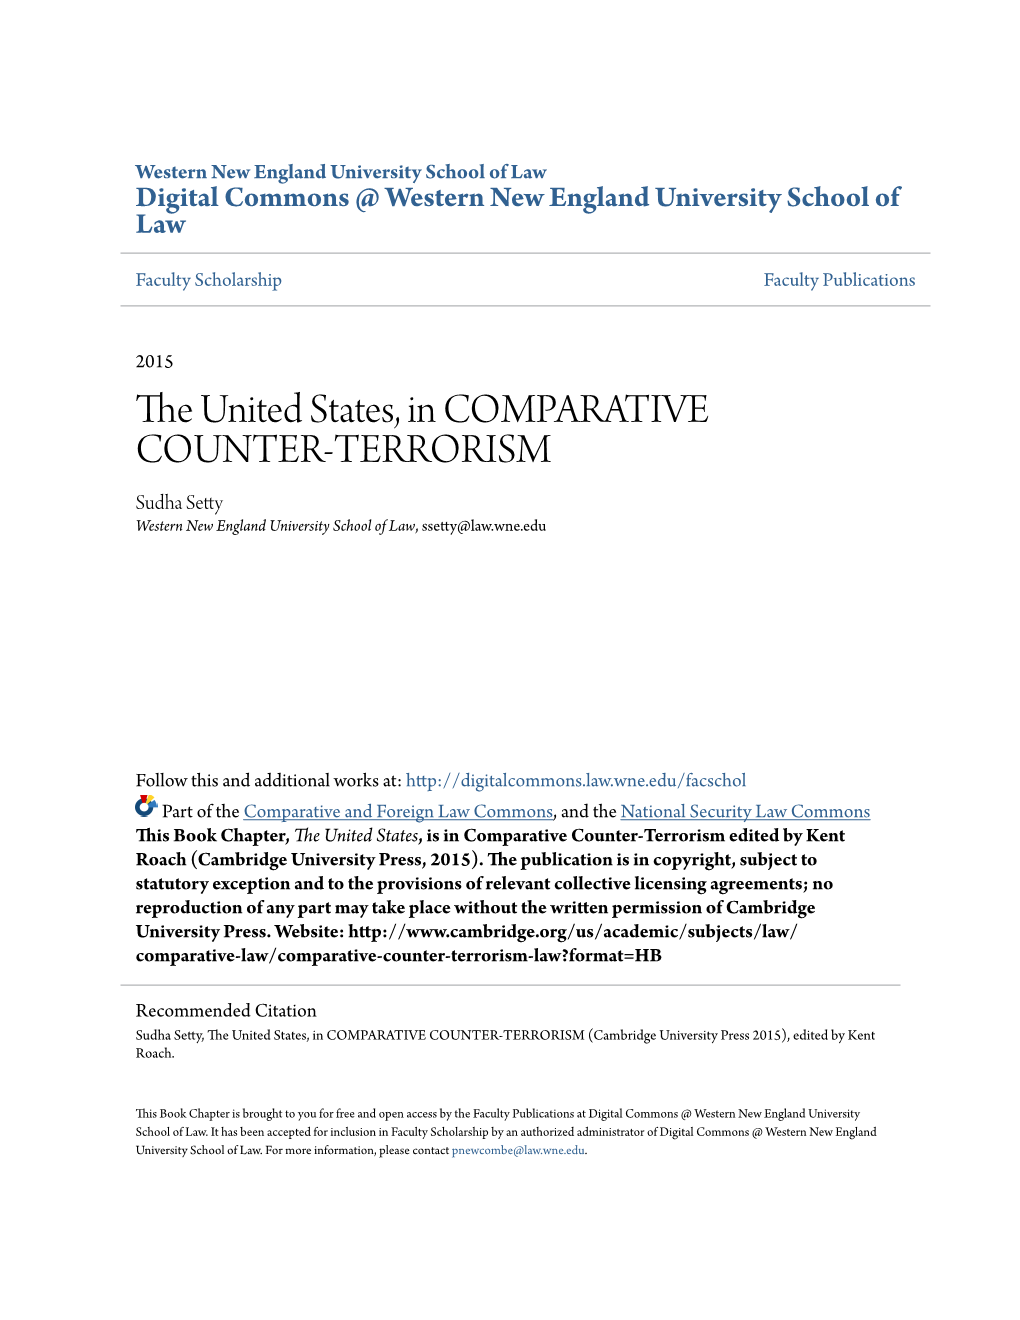 The United States, in COMPARATIVE COUNTER-TERRORISM